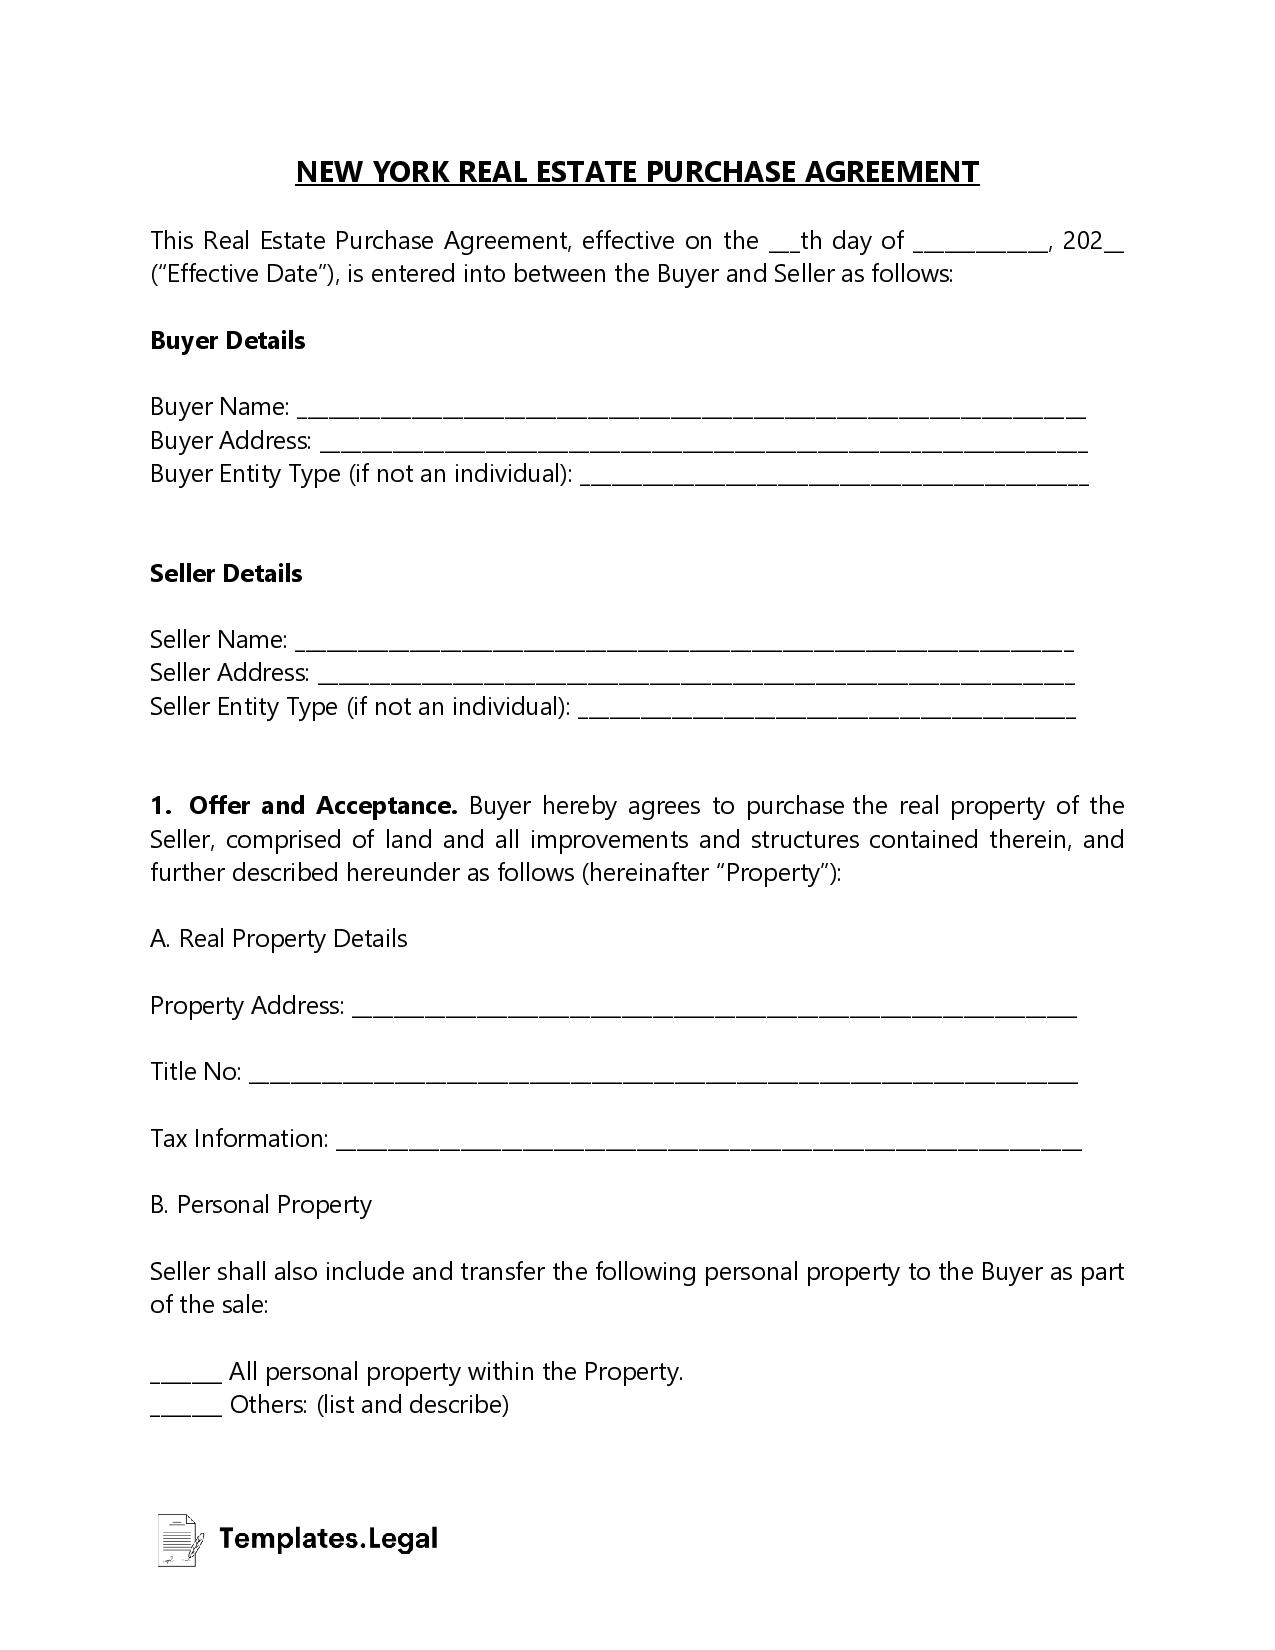 New York Real Estate Purchase Agreement - Templates.Legal